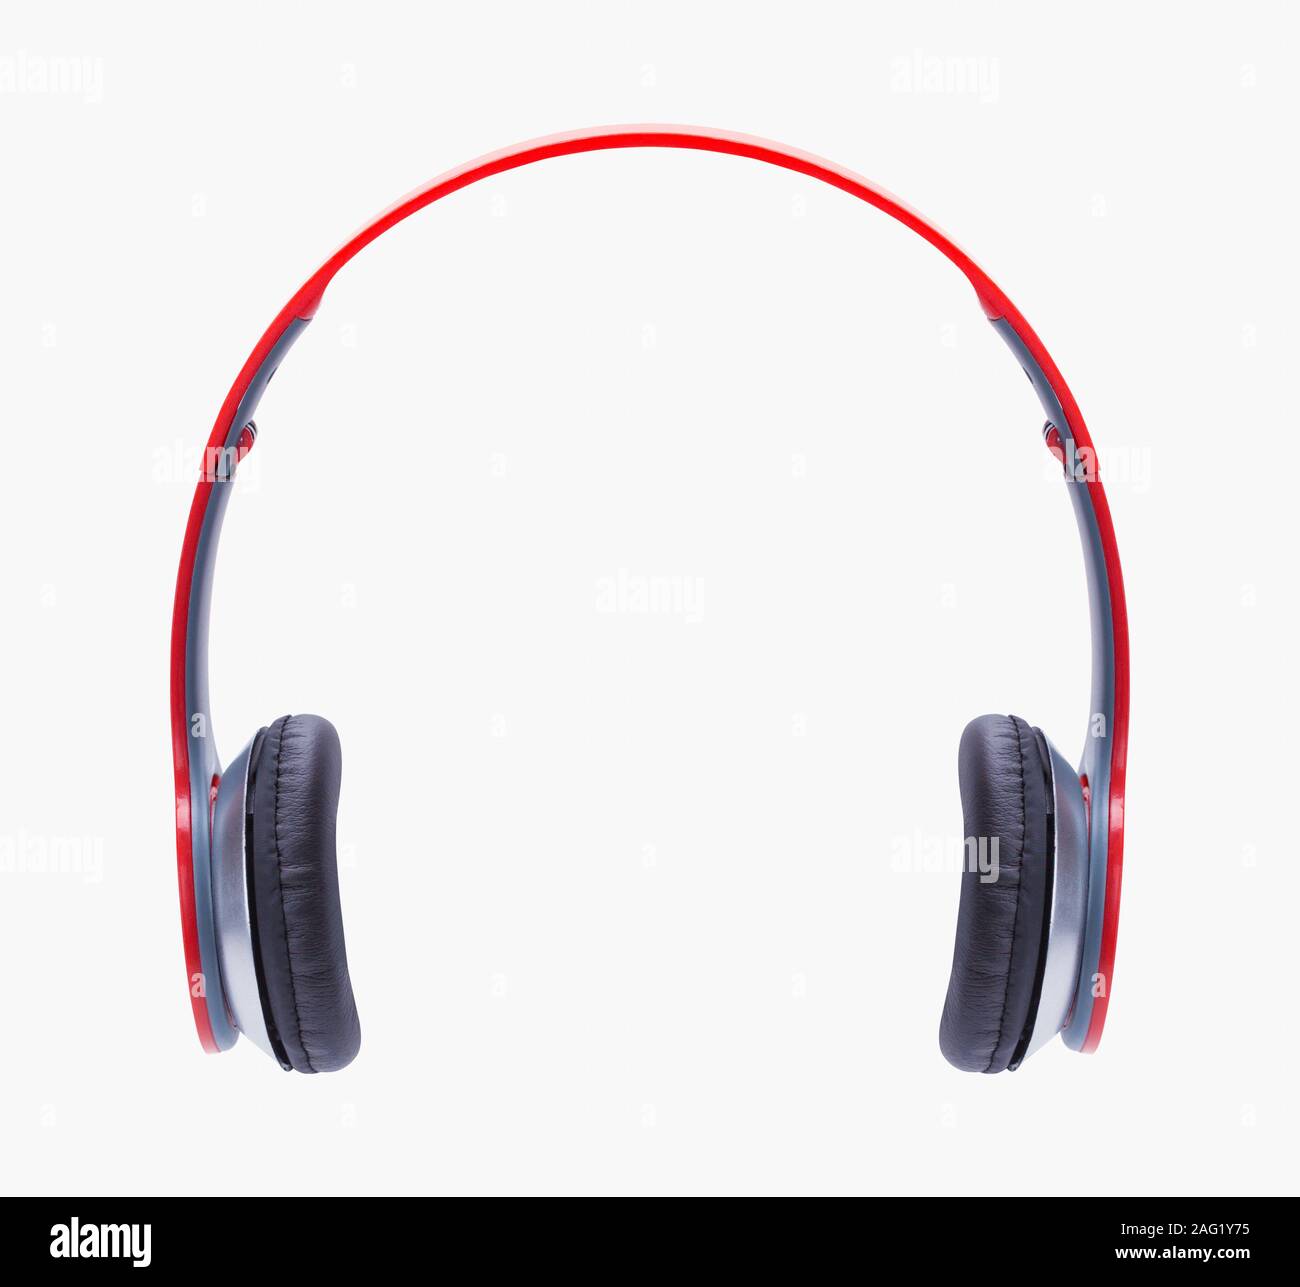 Red Head Phones Cut Out on White. Stock Photo